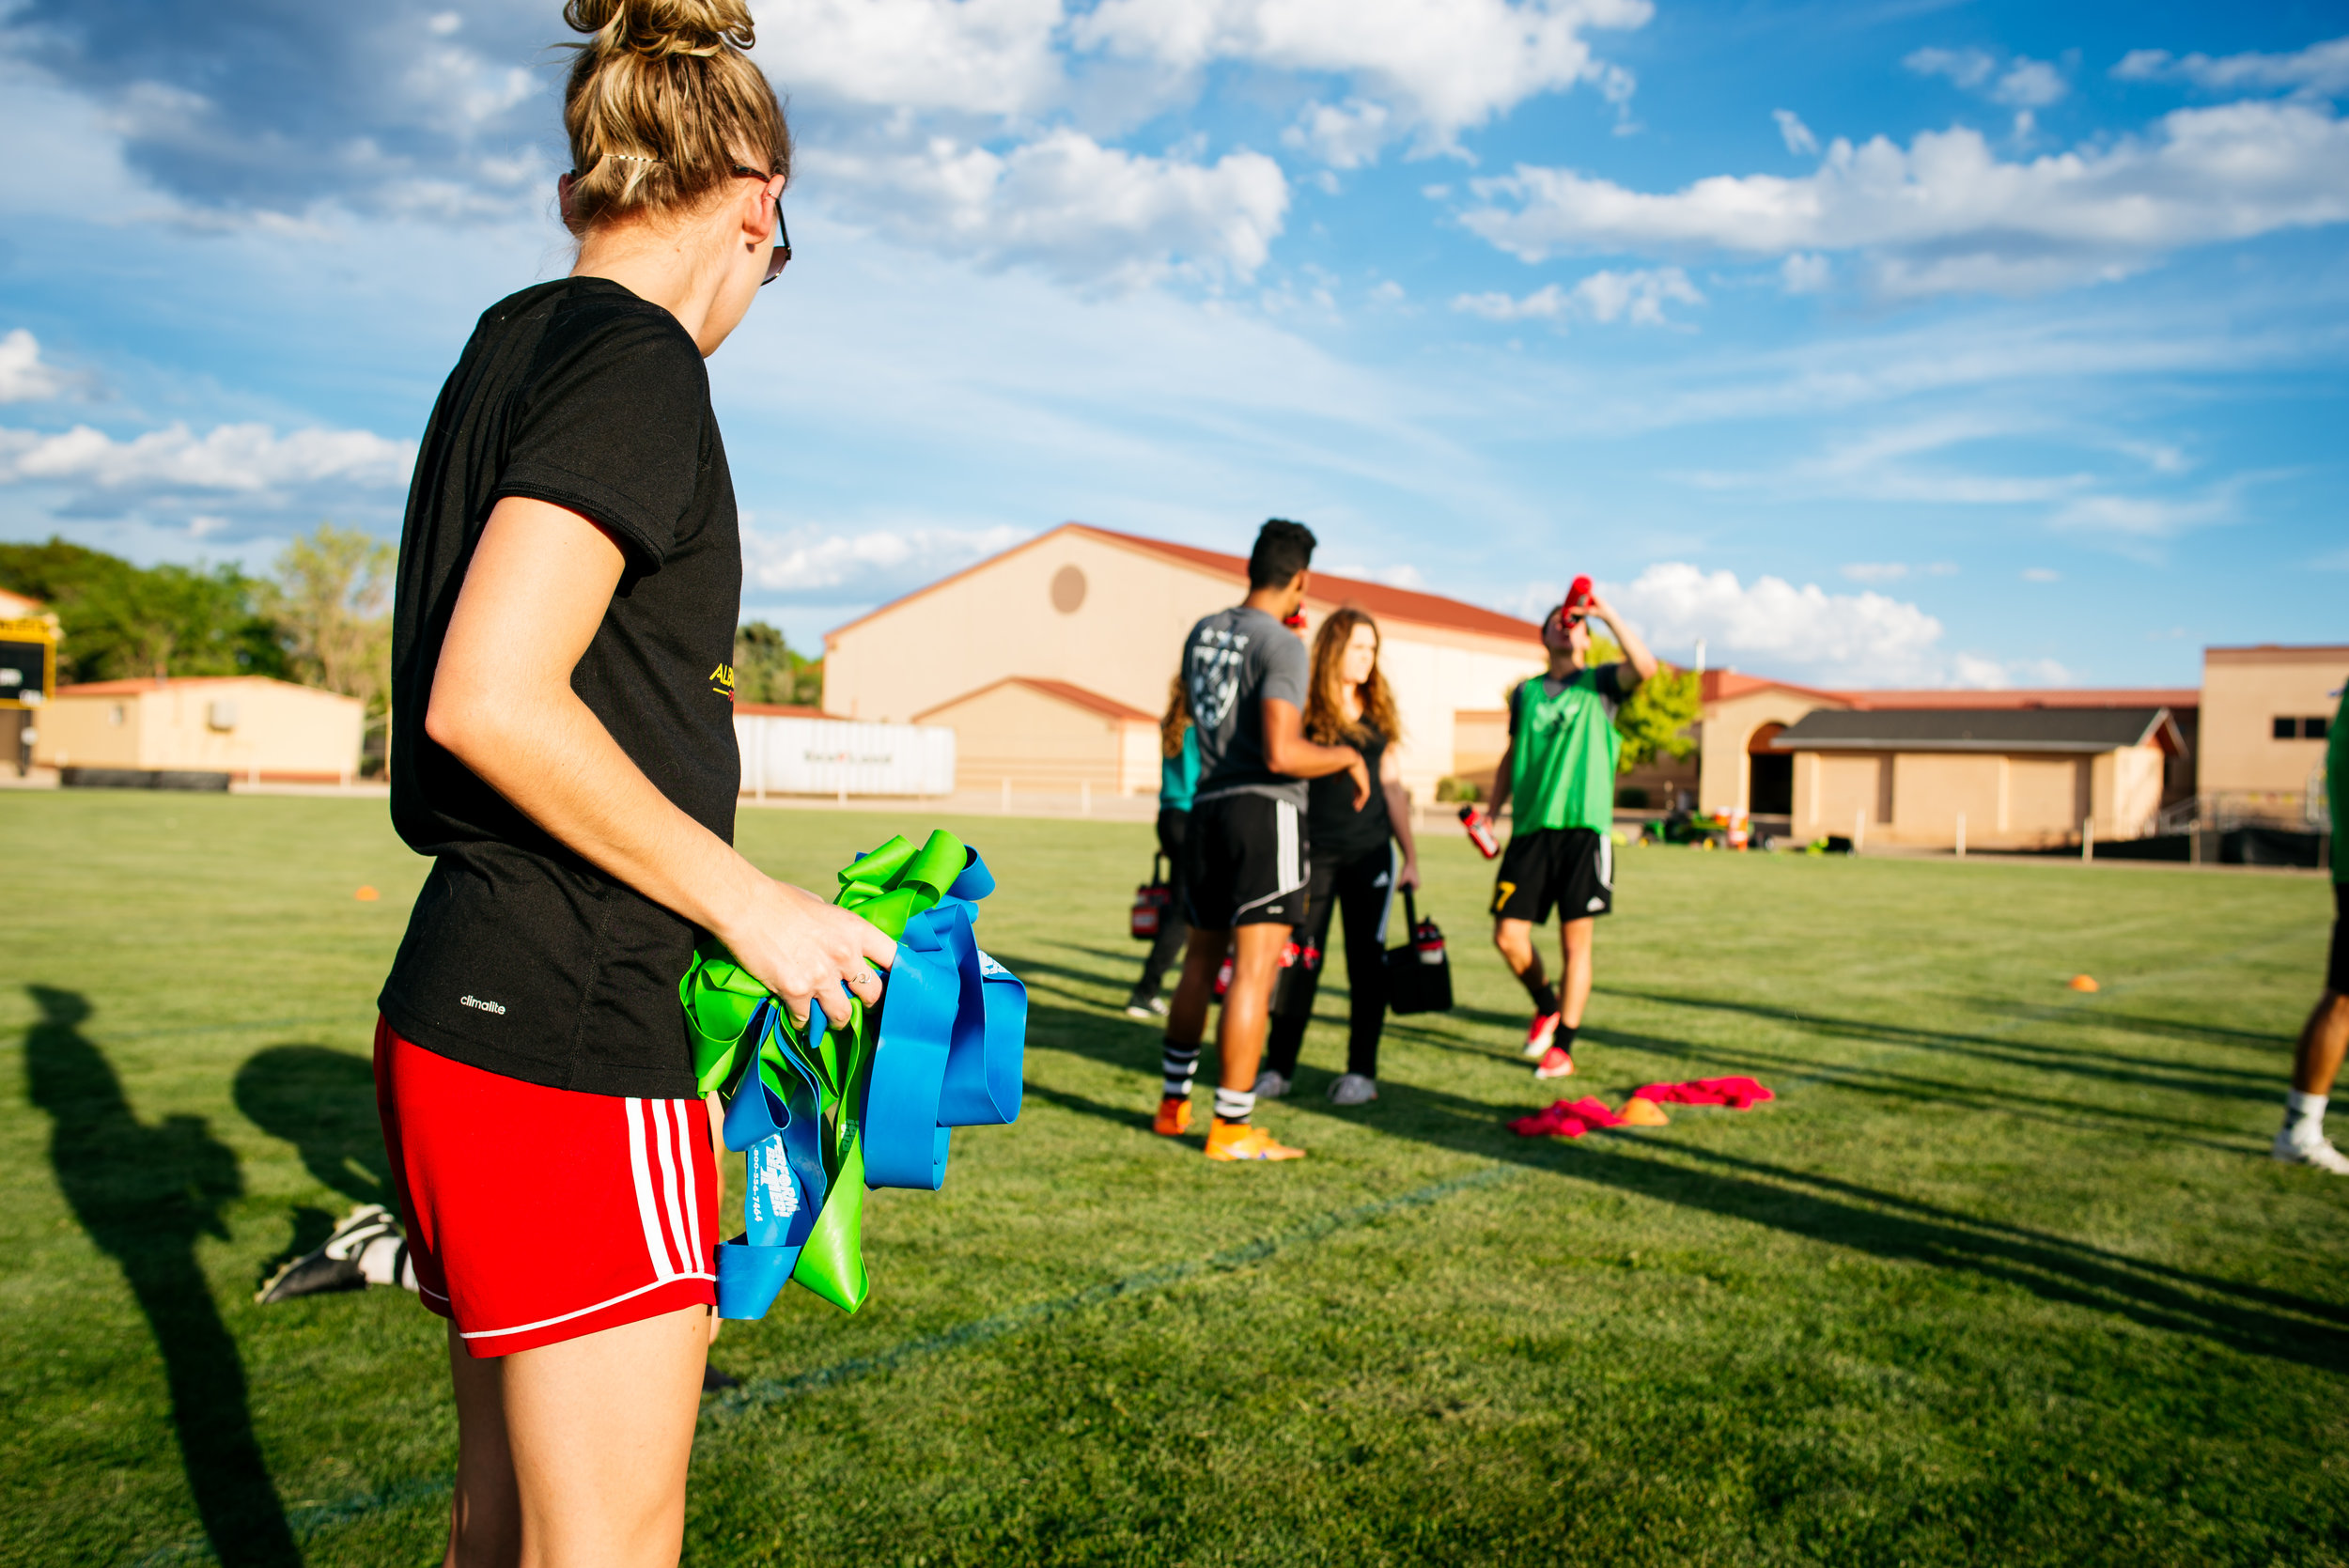 Soccer Injury Prevention: A free workshop for coaches, physical